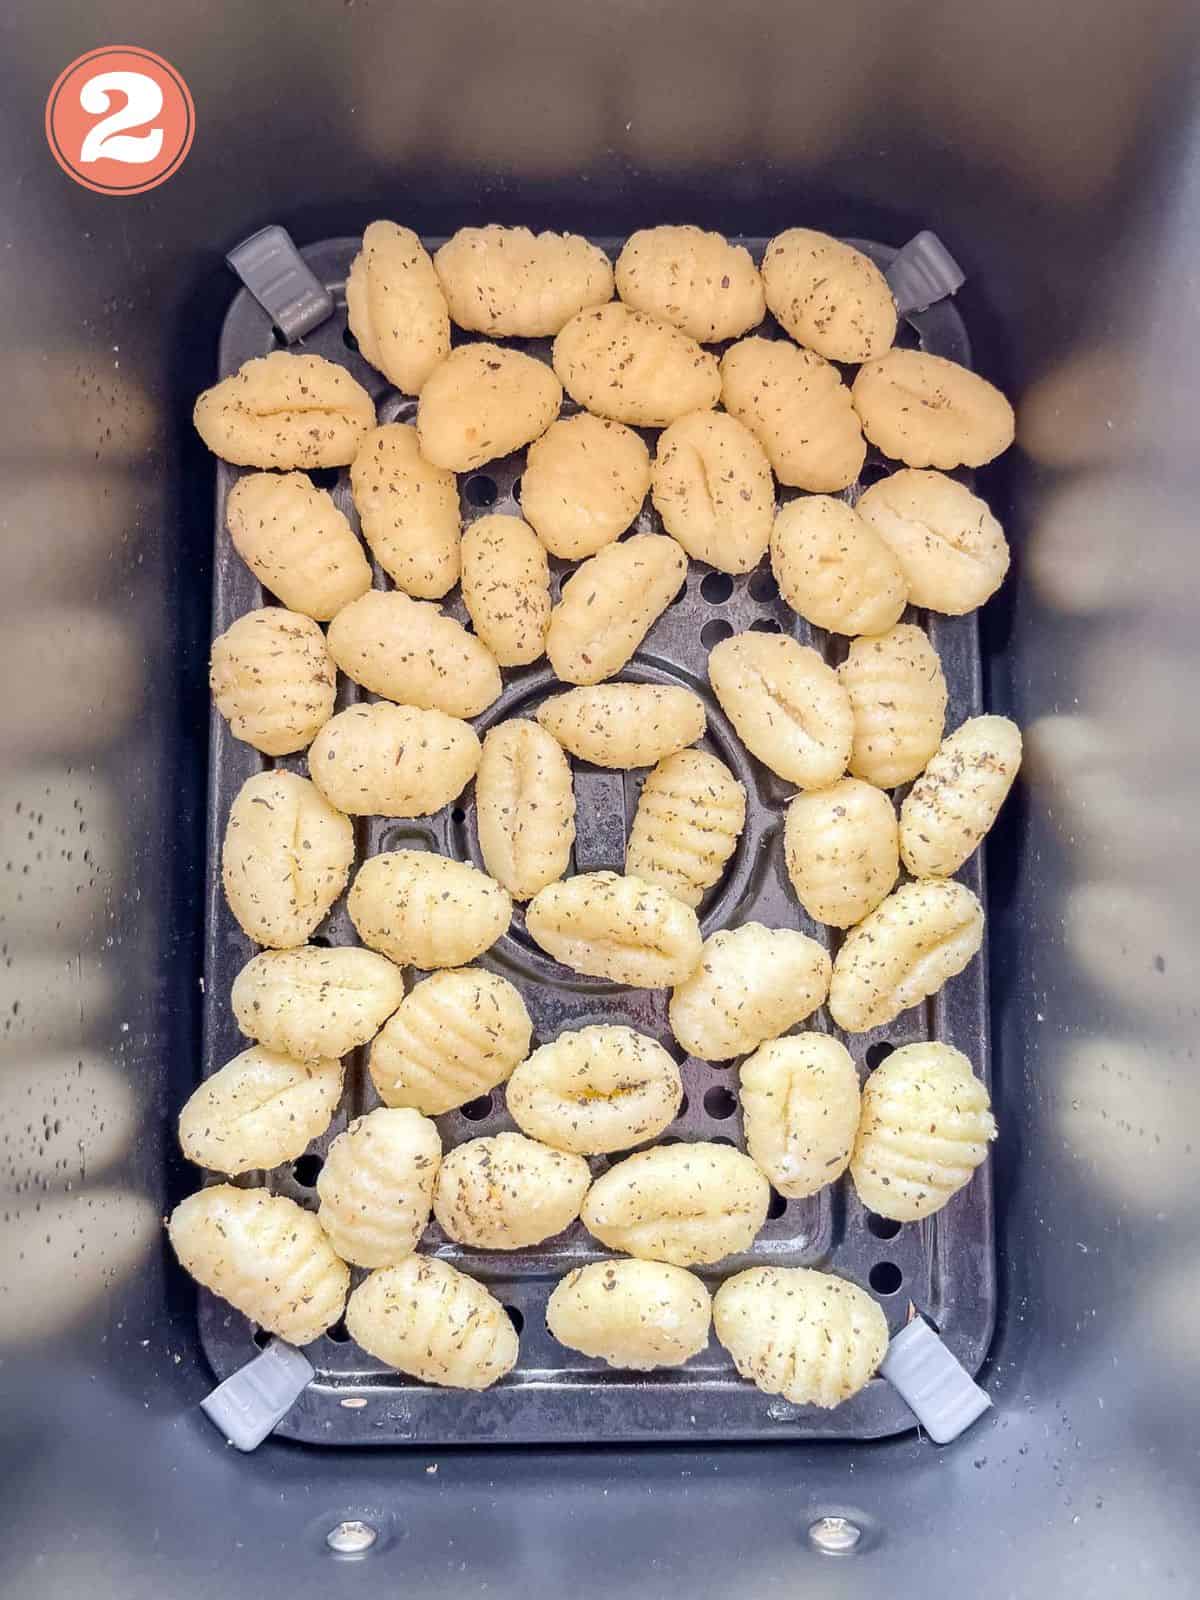 gnocchi in an air fryer basket labelled number two.